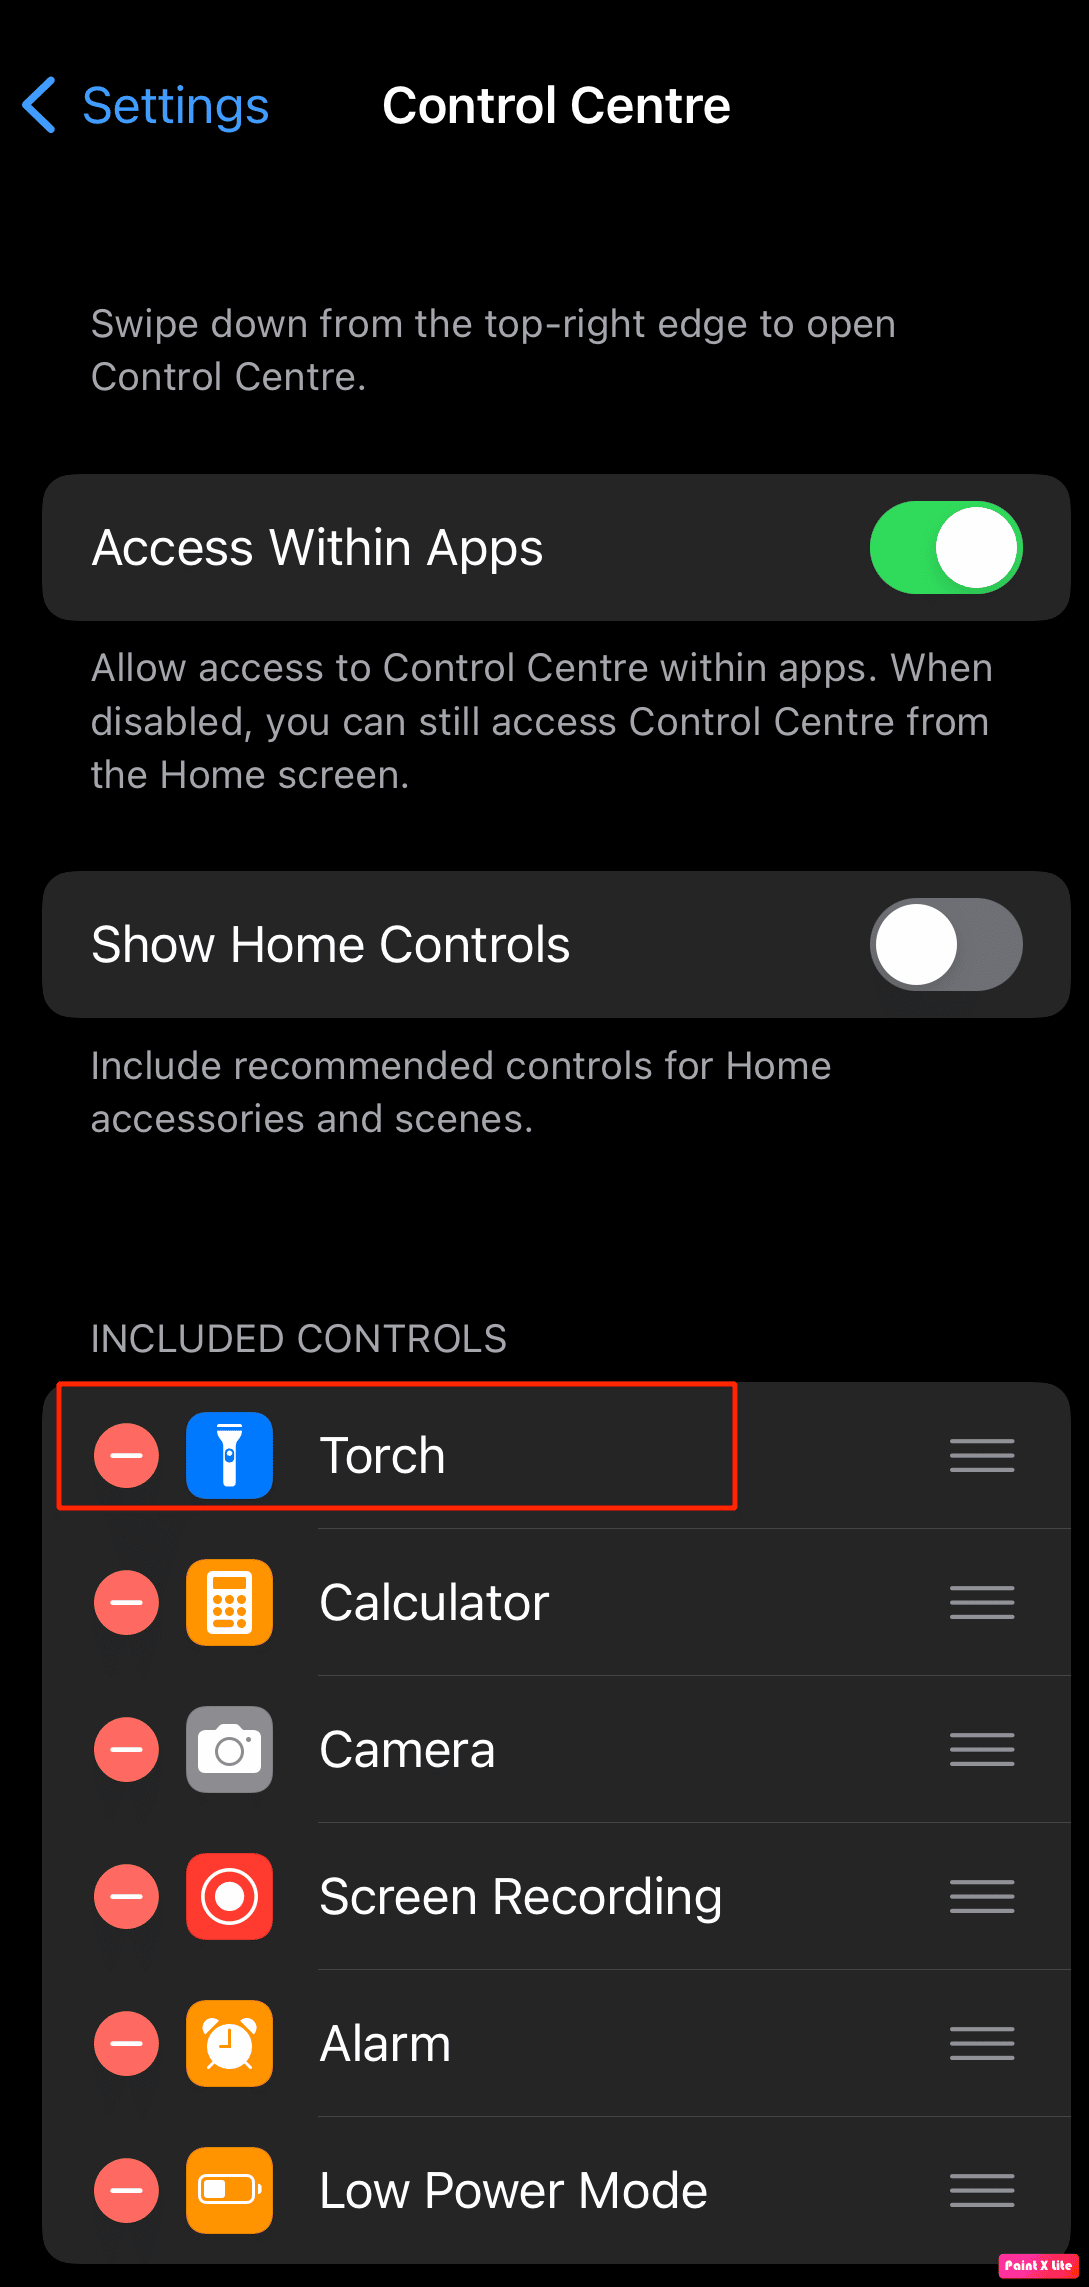 tap on red minus icon